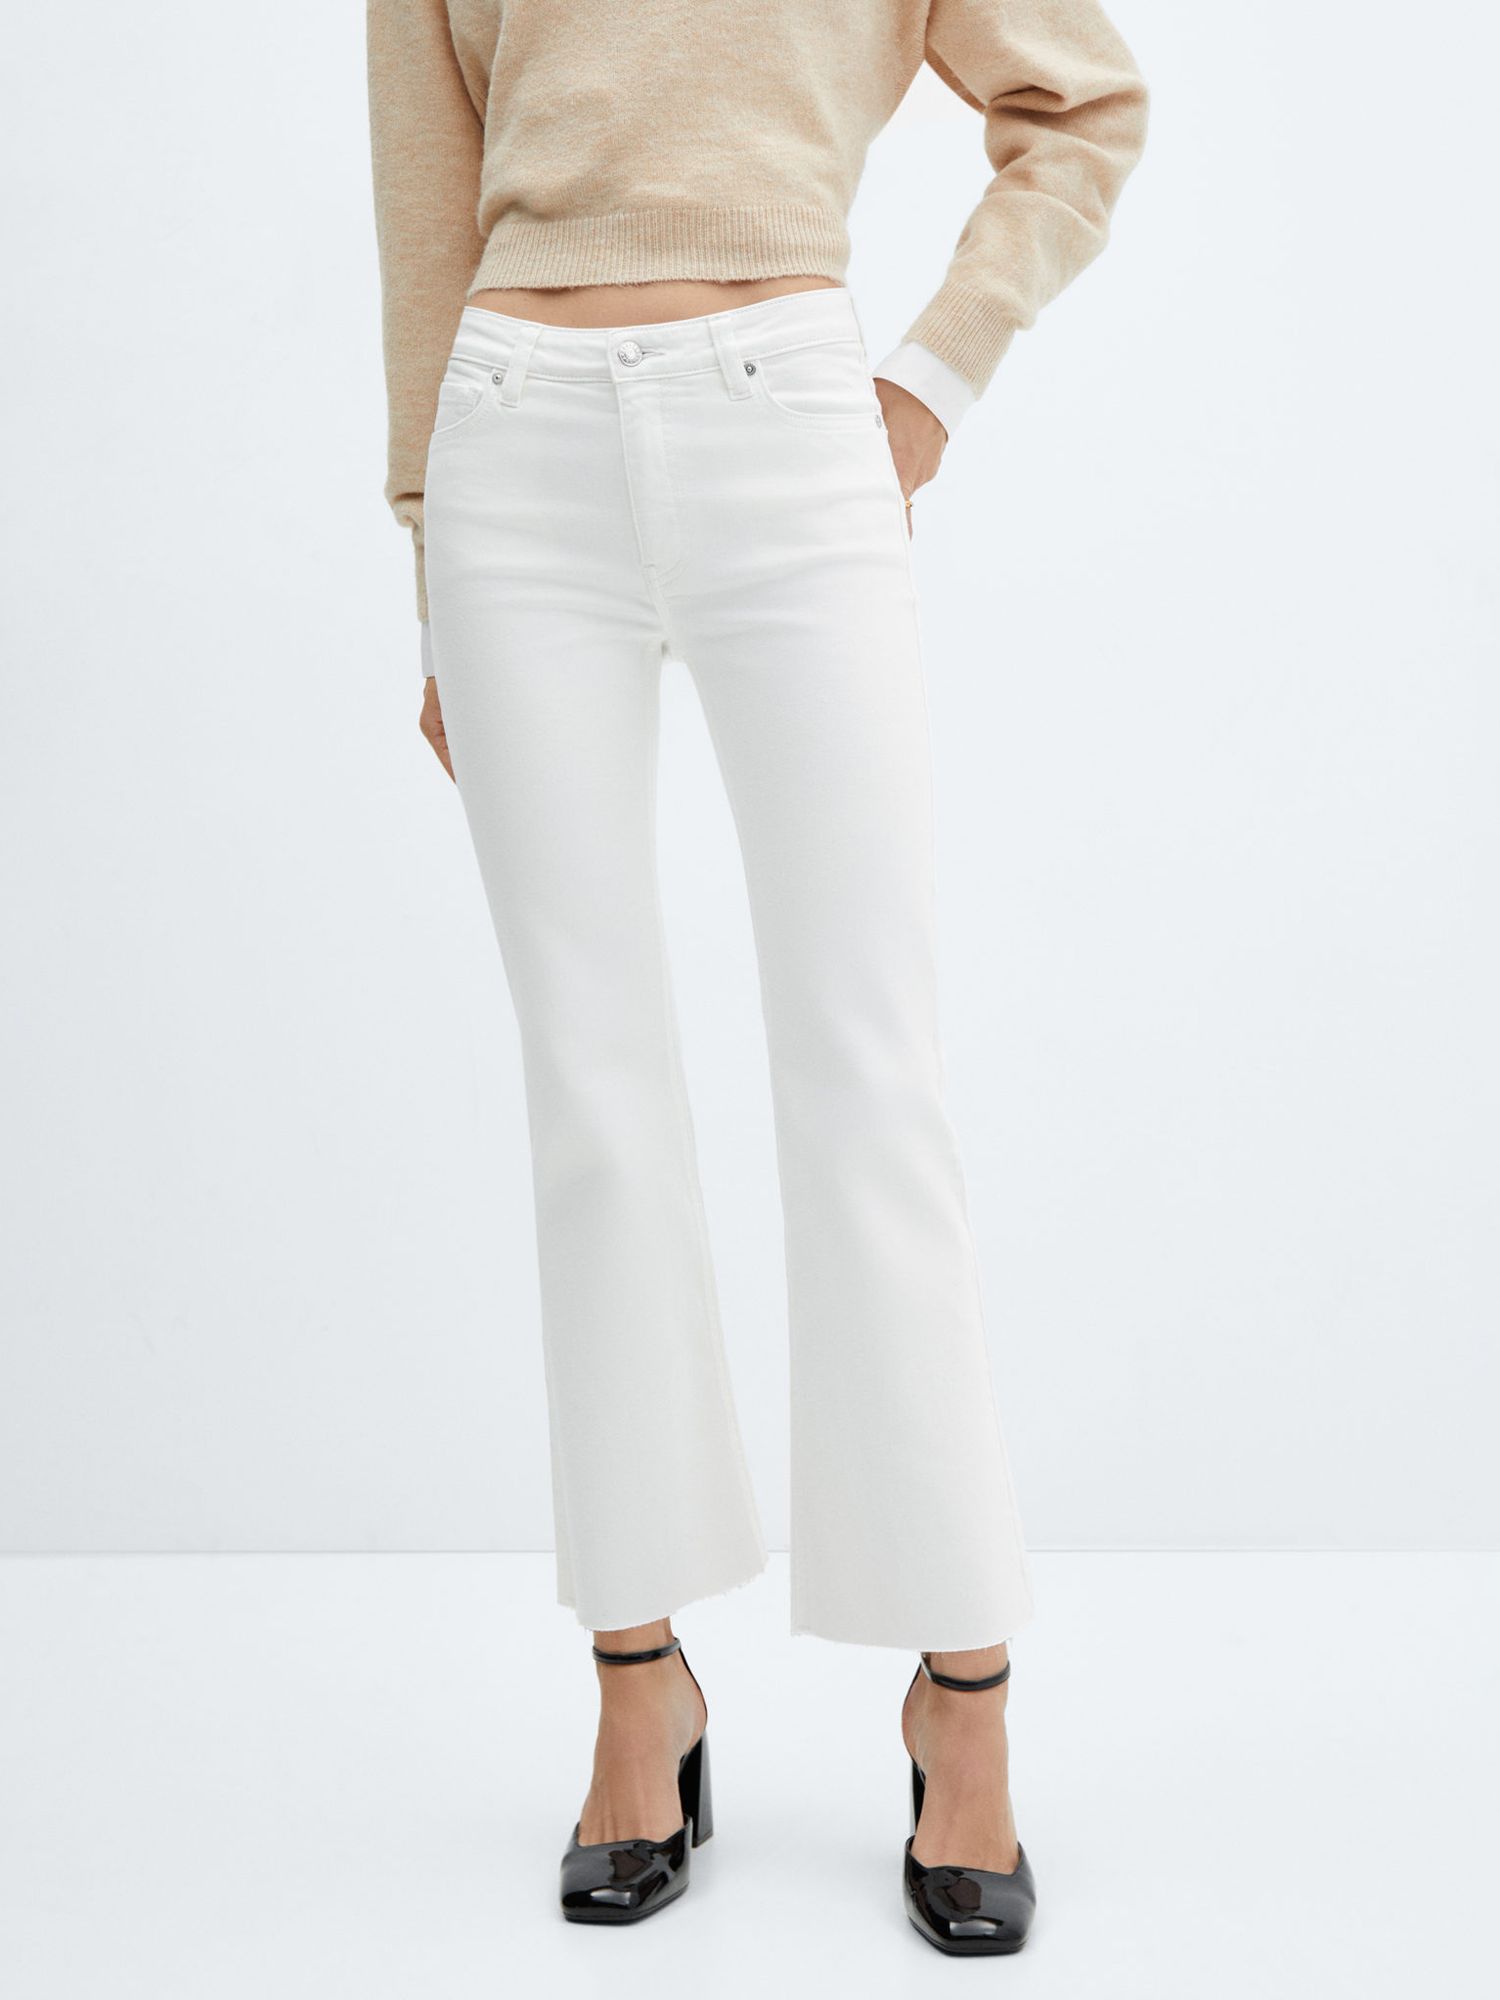 Mango Sienna Cropped Flared Jeans, White, 4